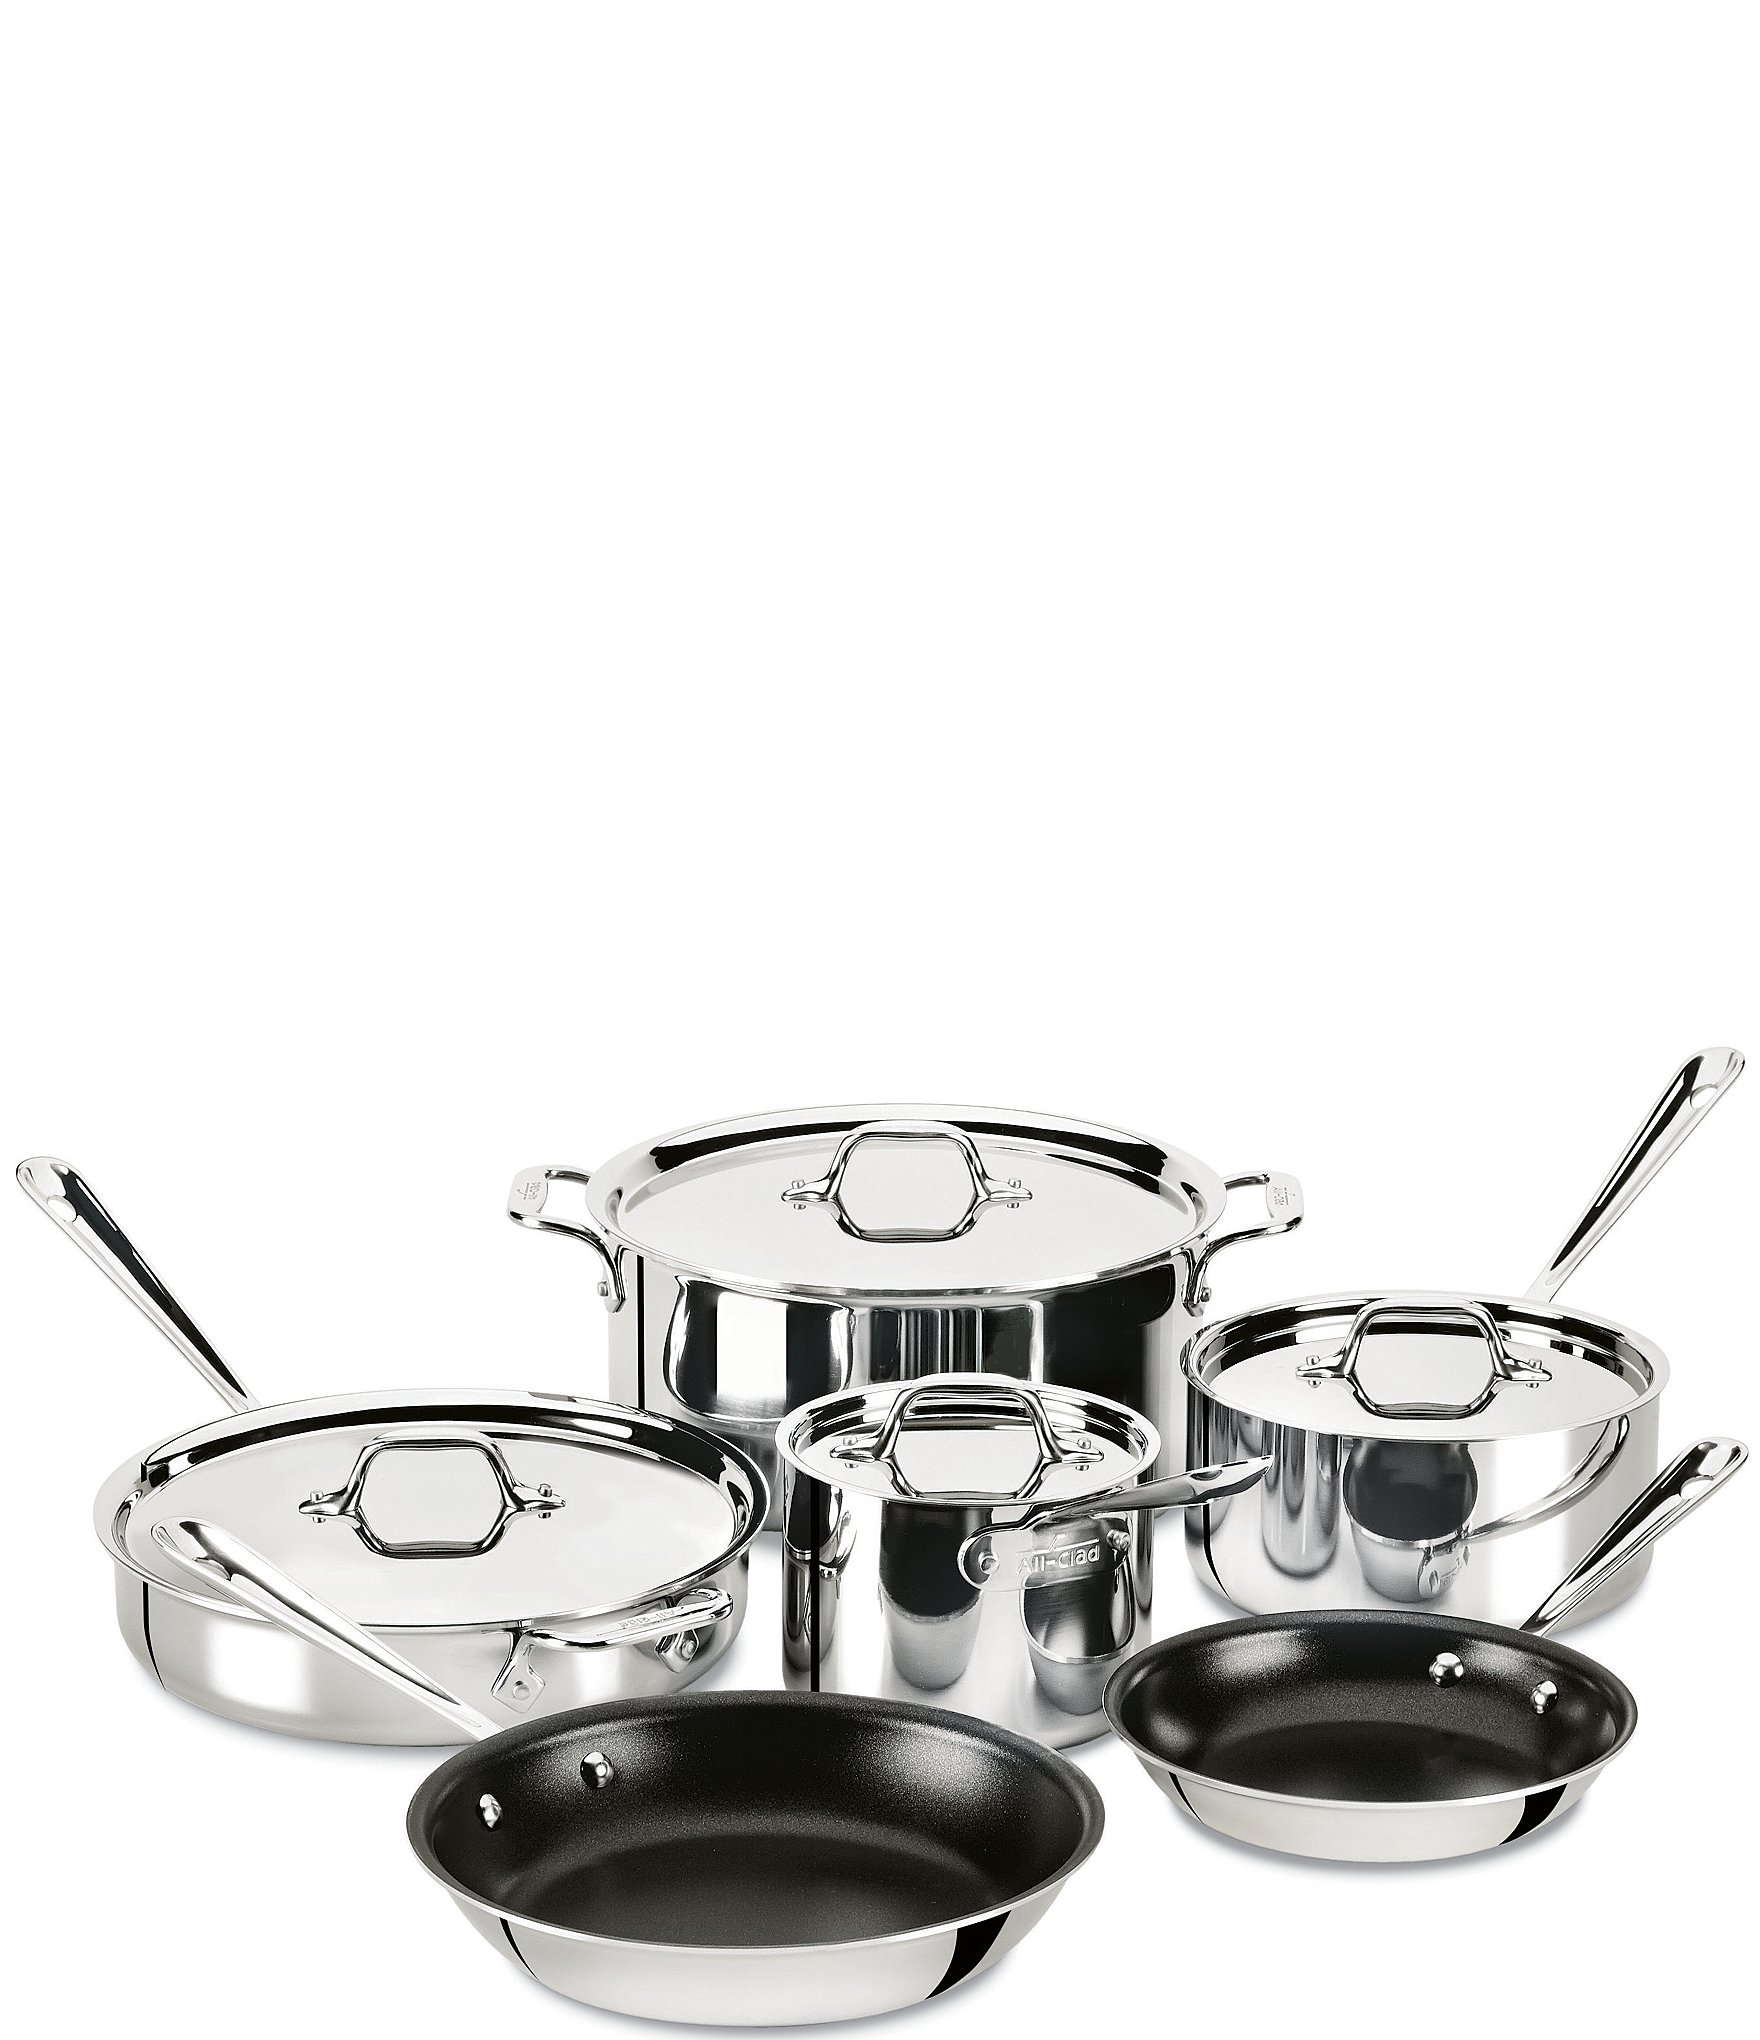 https://dimg.dillards.com/is/image/DillardsZoom/zoom/all-clad-d3-stainless-3-ply-bonded-cookware-set-nonstick-10-piece-set/20164636_zi.jpg